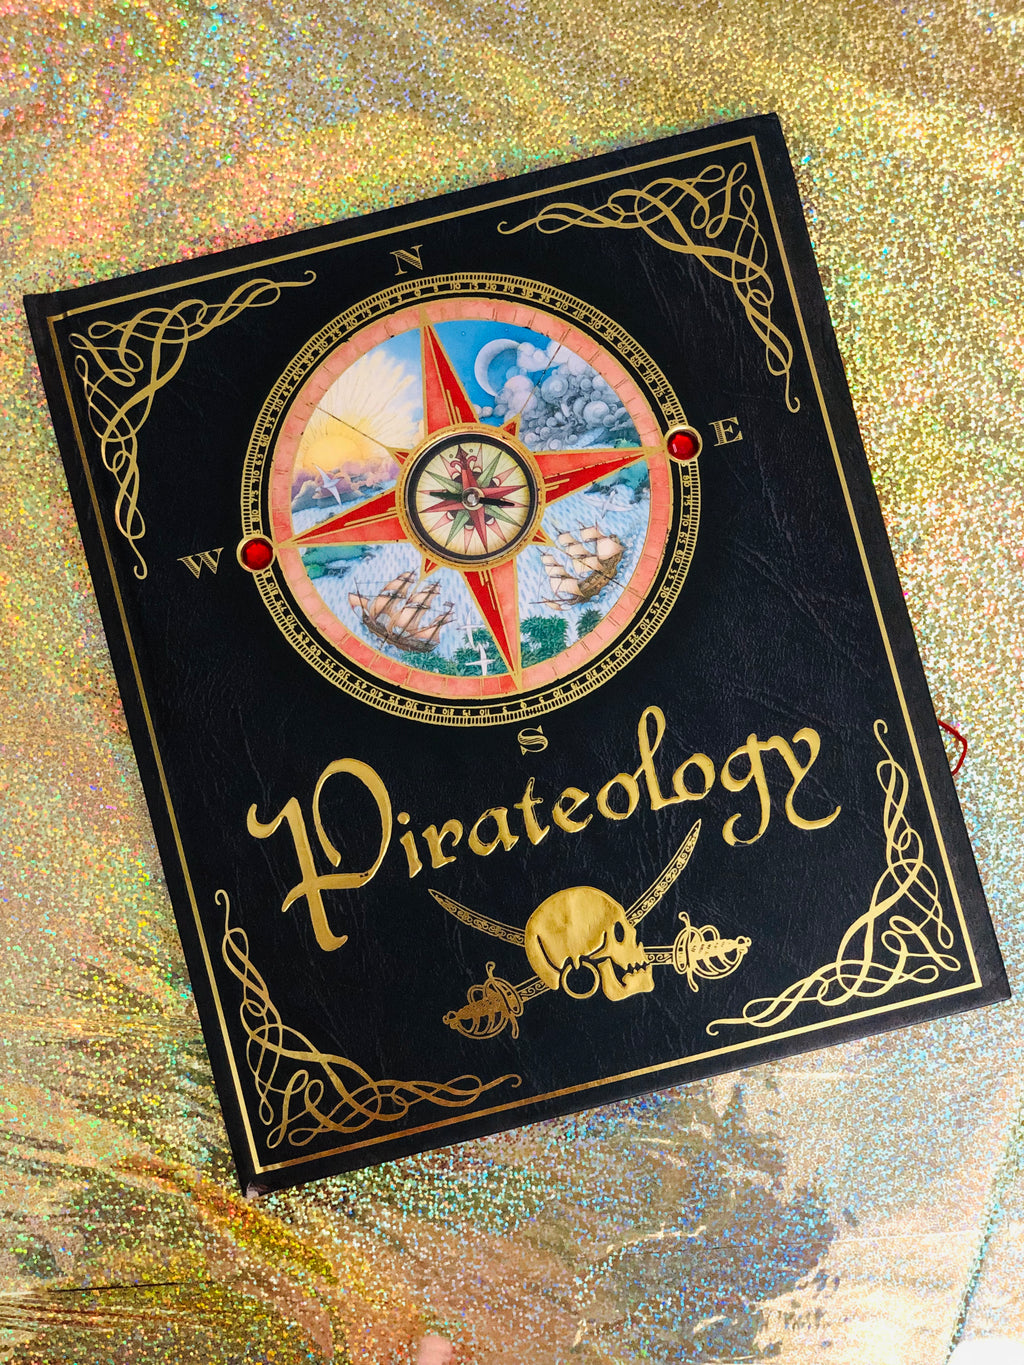 Pirateology- By William Captain Lubber